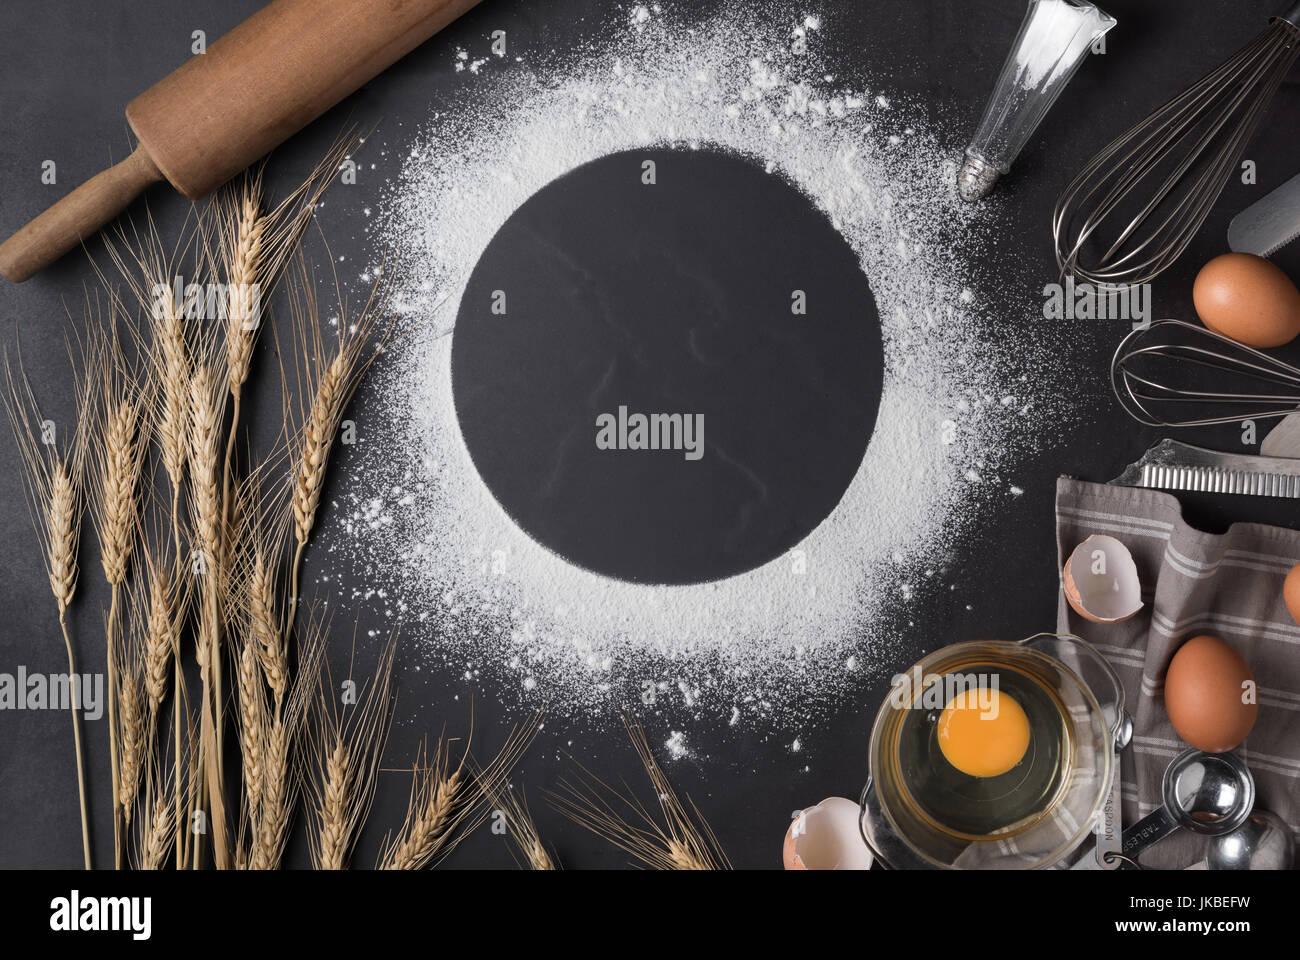 Baking utensils and ingredient with whisk egg on black background, Frame border design text space images. Stock Photo